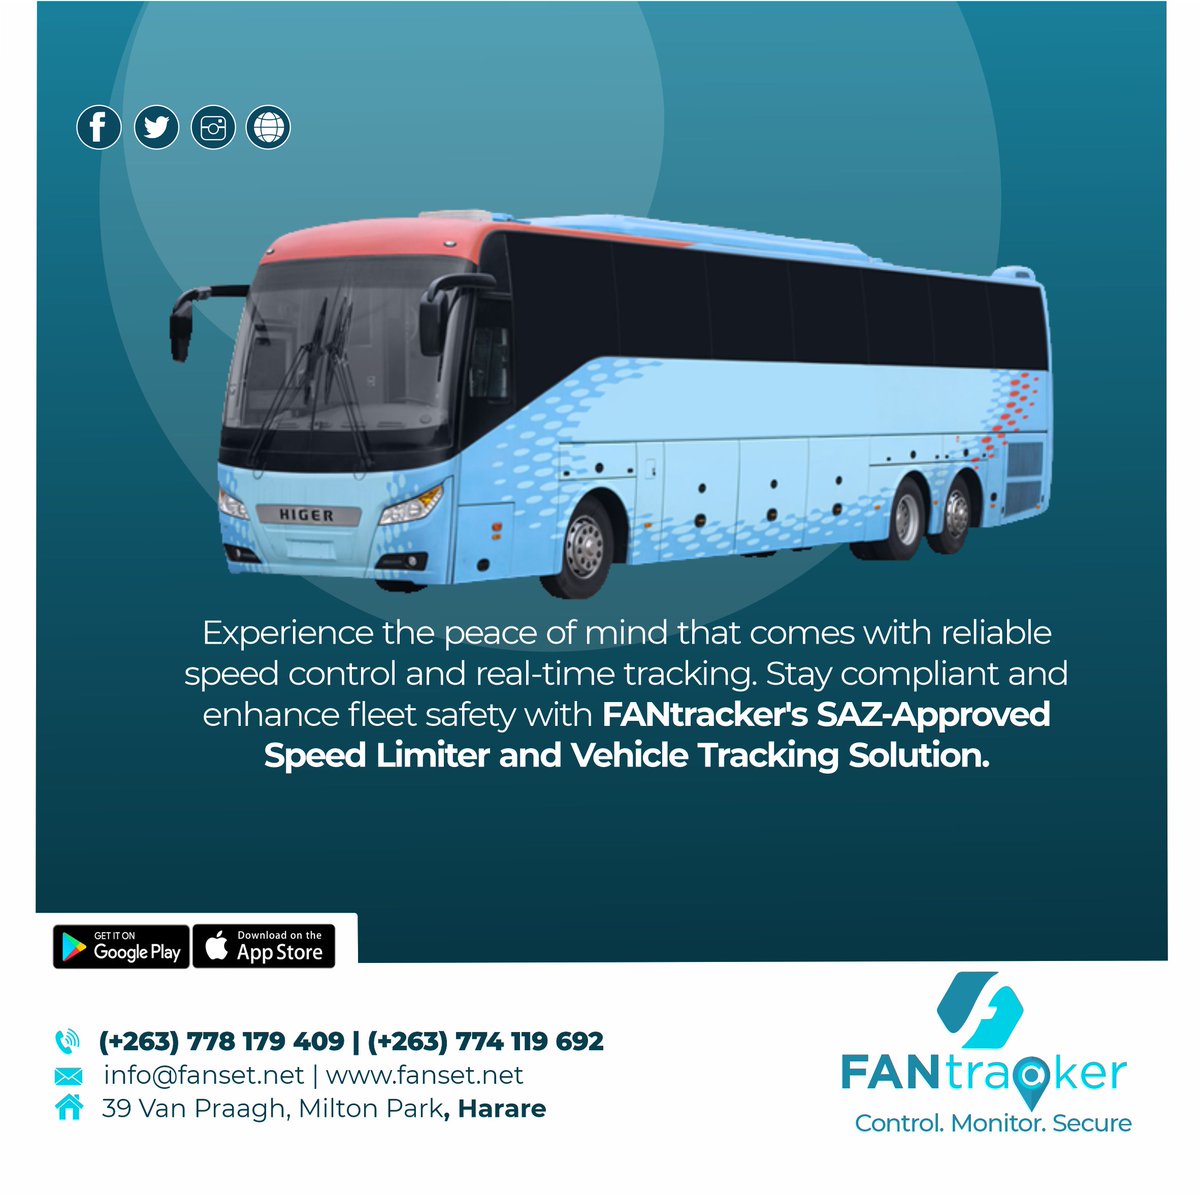 Experience the peace of mind that comes with reliable Speed Control & real time -tracking. Stay compliant & enhance fleet safety with FANtracker 'SAZ-Approved Speed Limiter and Vehicle Tracking Solution! Contact: +263778179409 / 0774119692 #Fantracker #Fuelmonitoring #Tracking